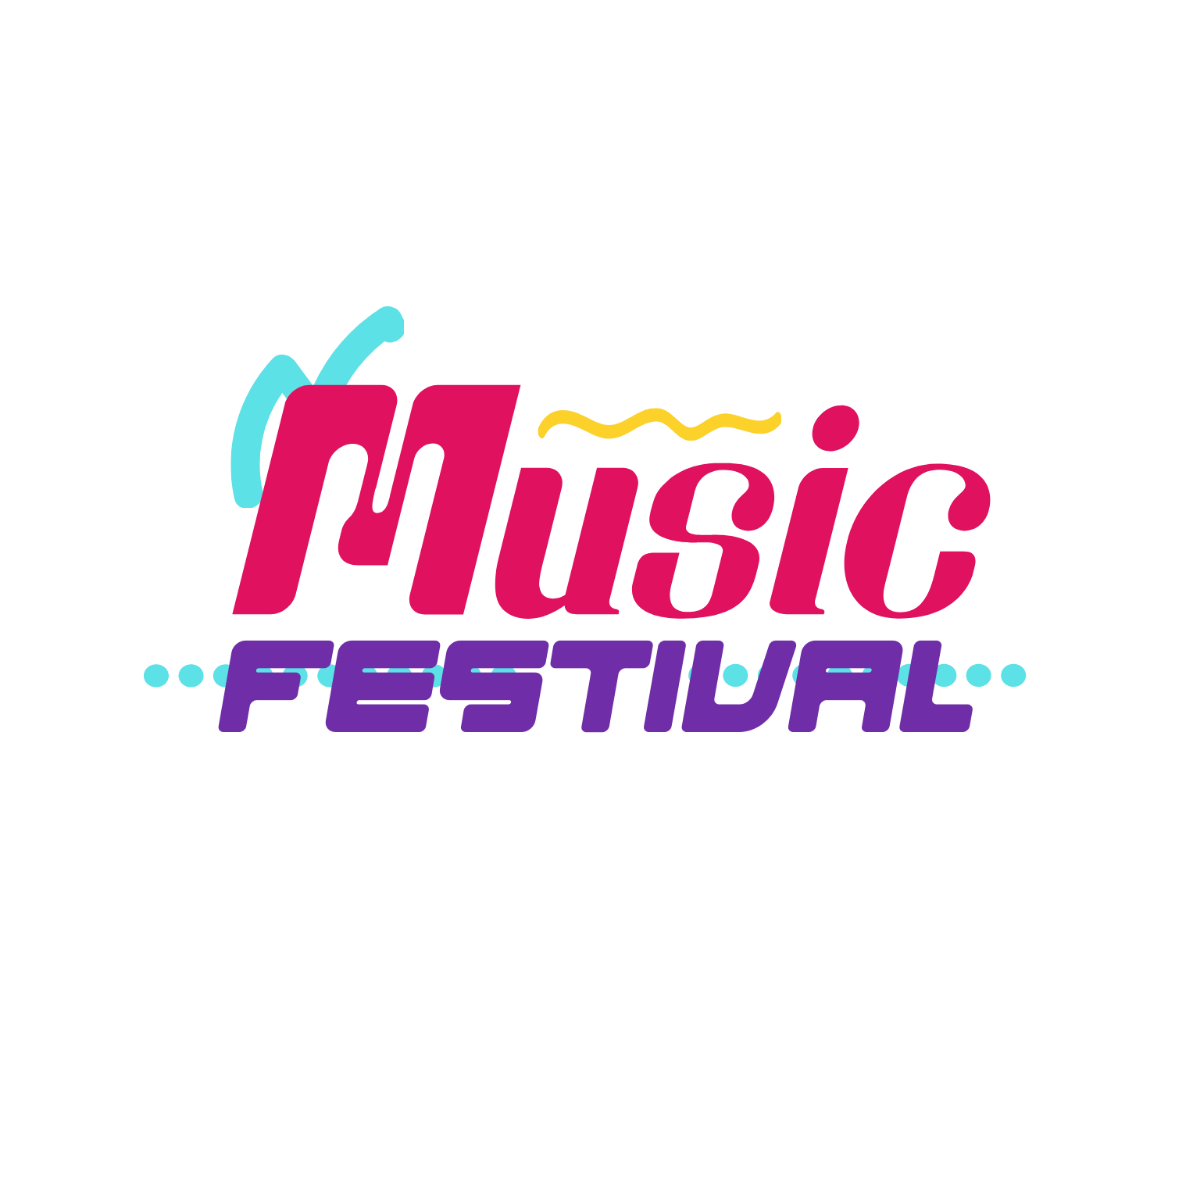 Free Music Festival Text Effect